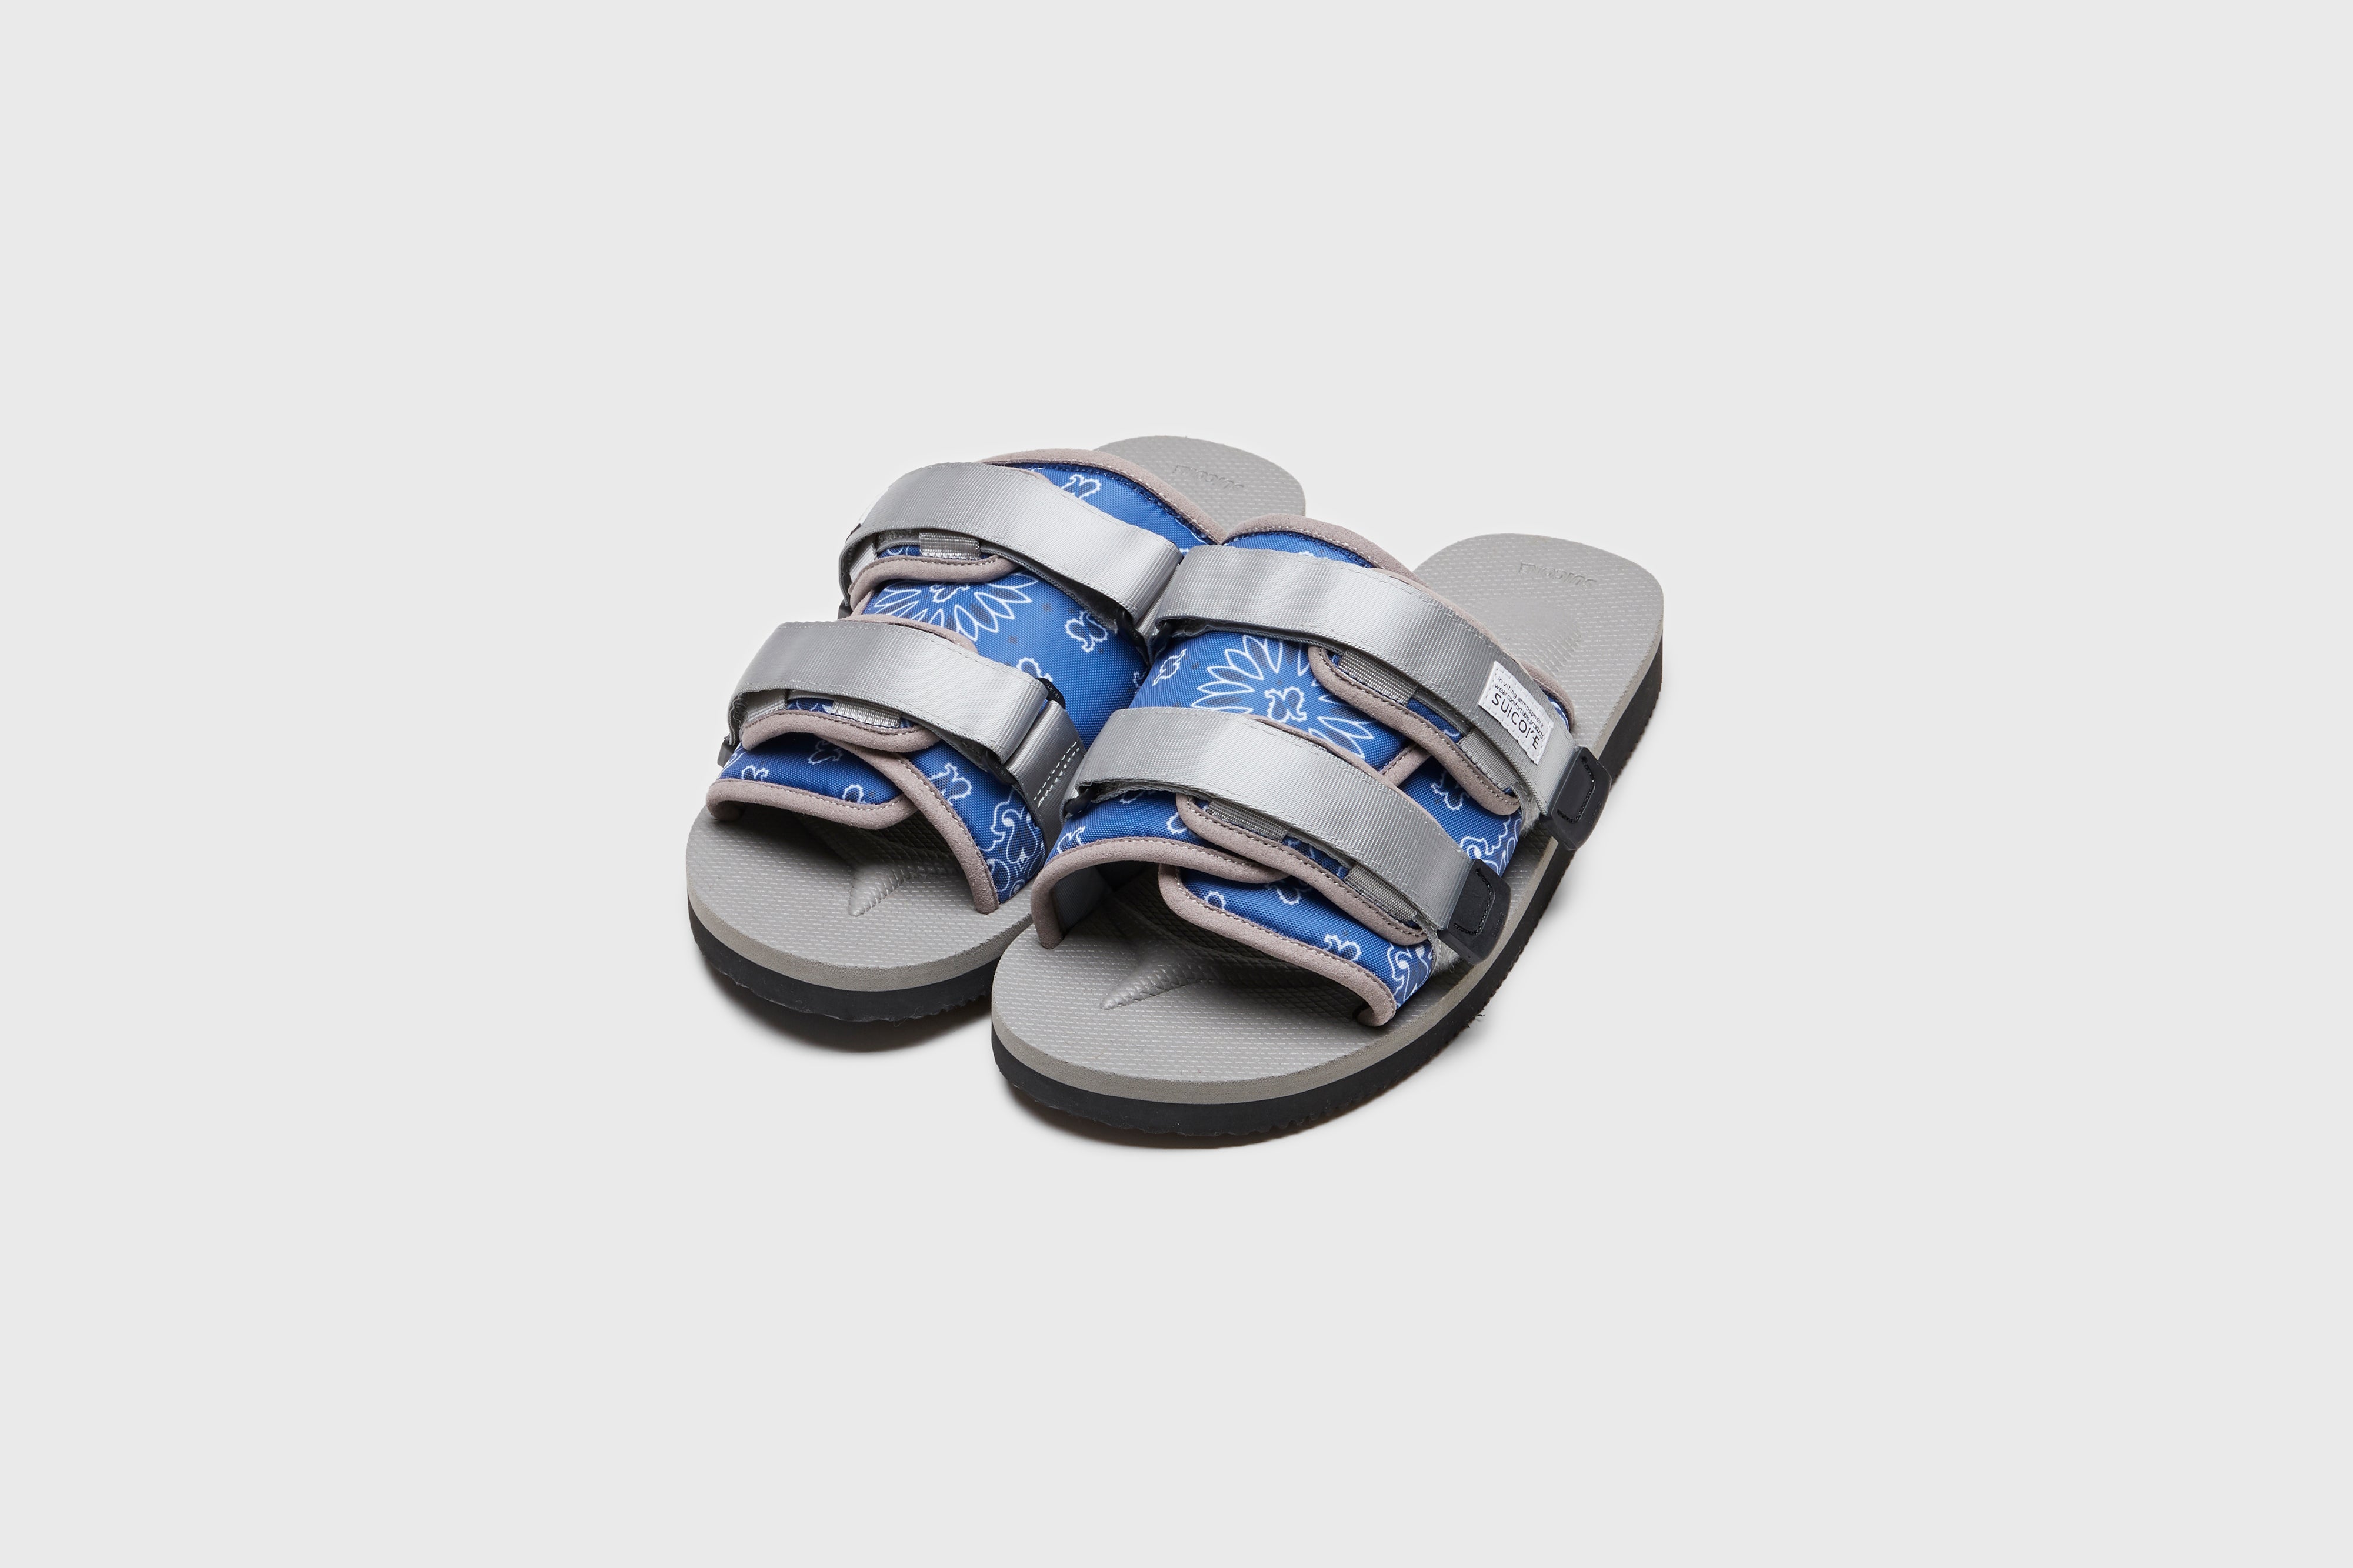 SUICOKE MOTO-Cab-PT05 slides with navy &amp; gray nylon upper, navy &amp; gray midsole and sole, strap and logo patch. From Spring/Summer 2023 collection on eightywingold Web Store, an official partner of SUICOKE. OG-056CAB-PT05 NAVY X GRAY